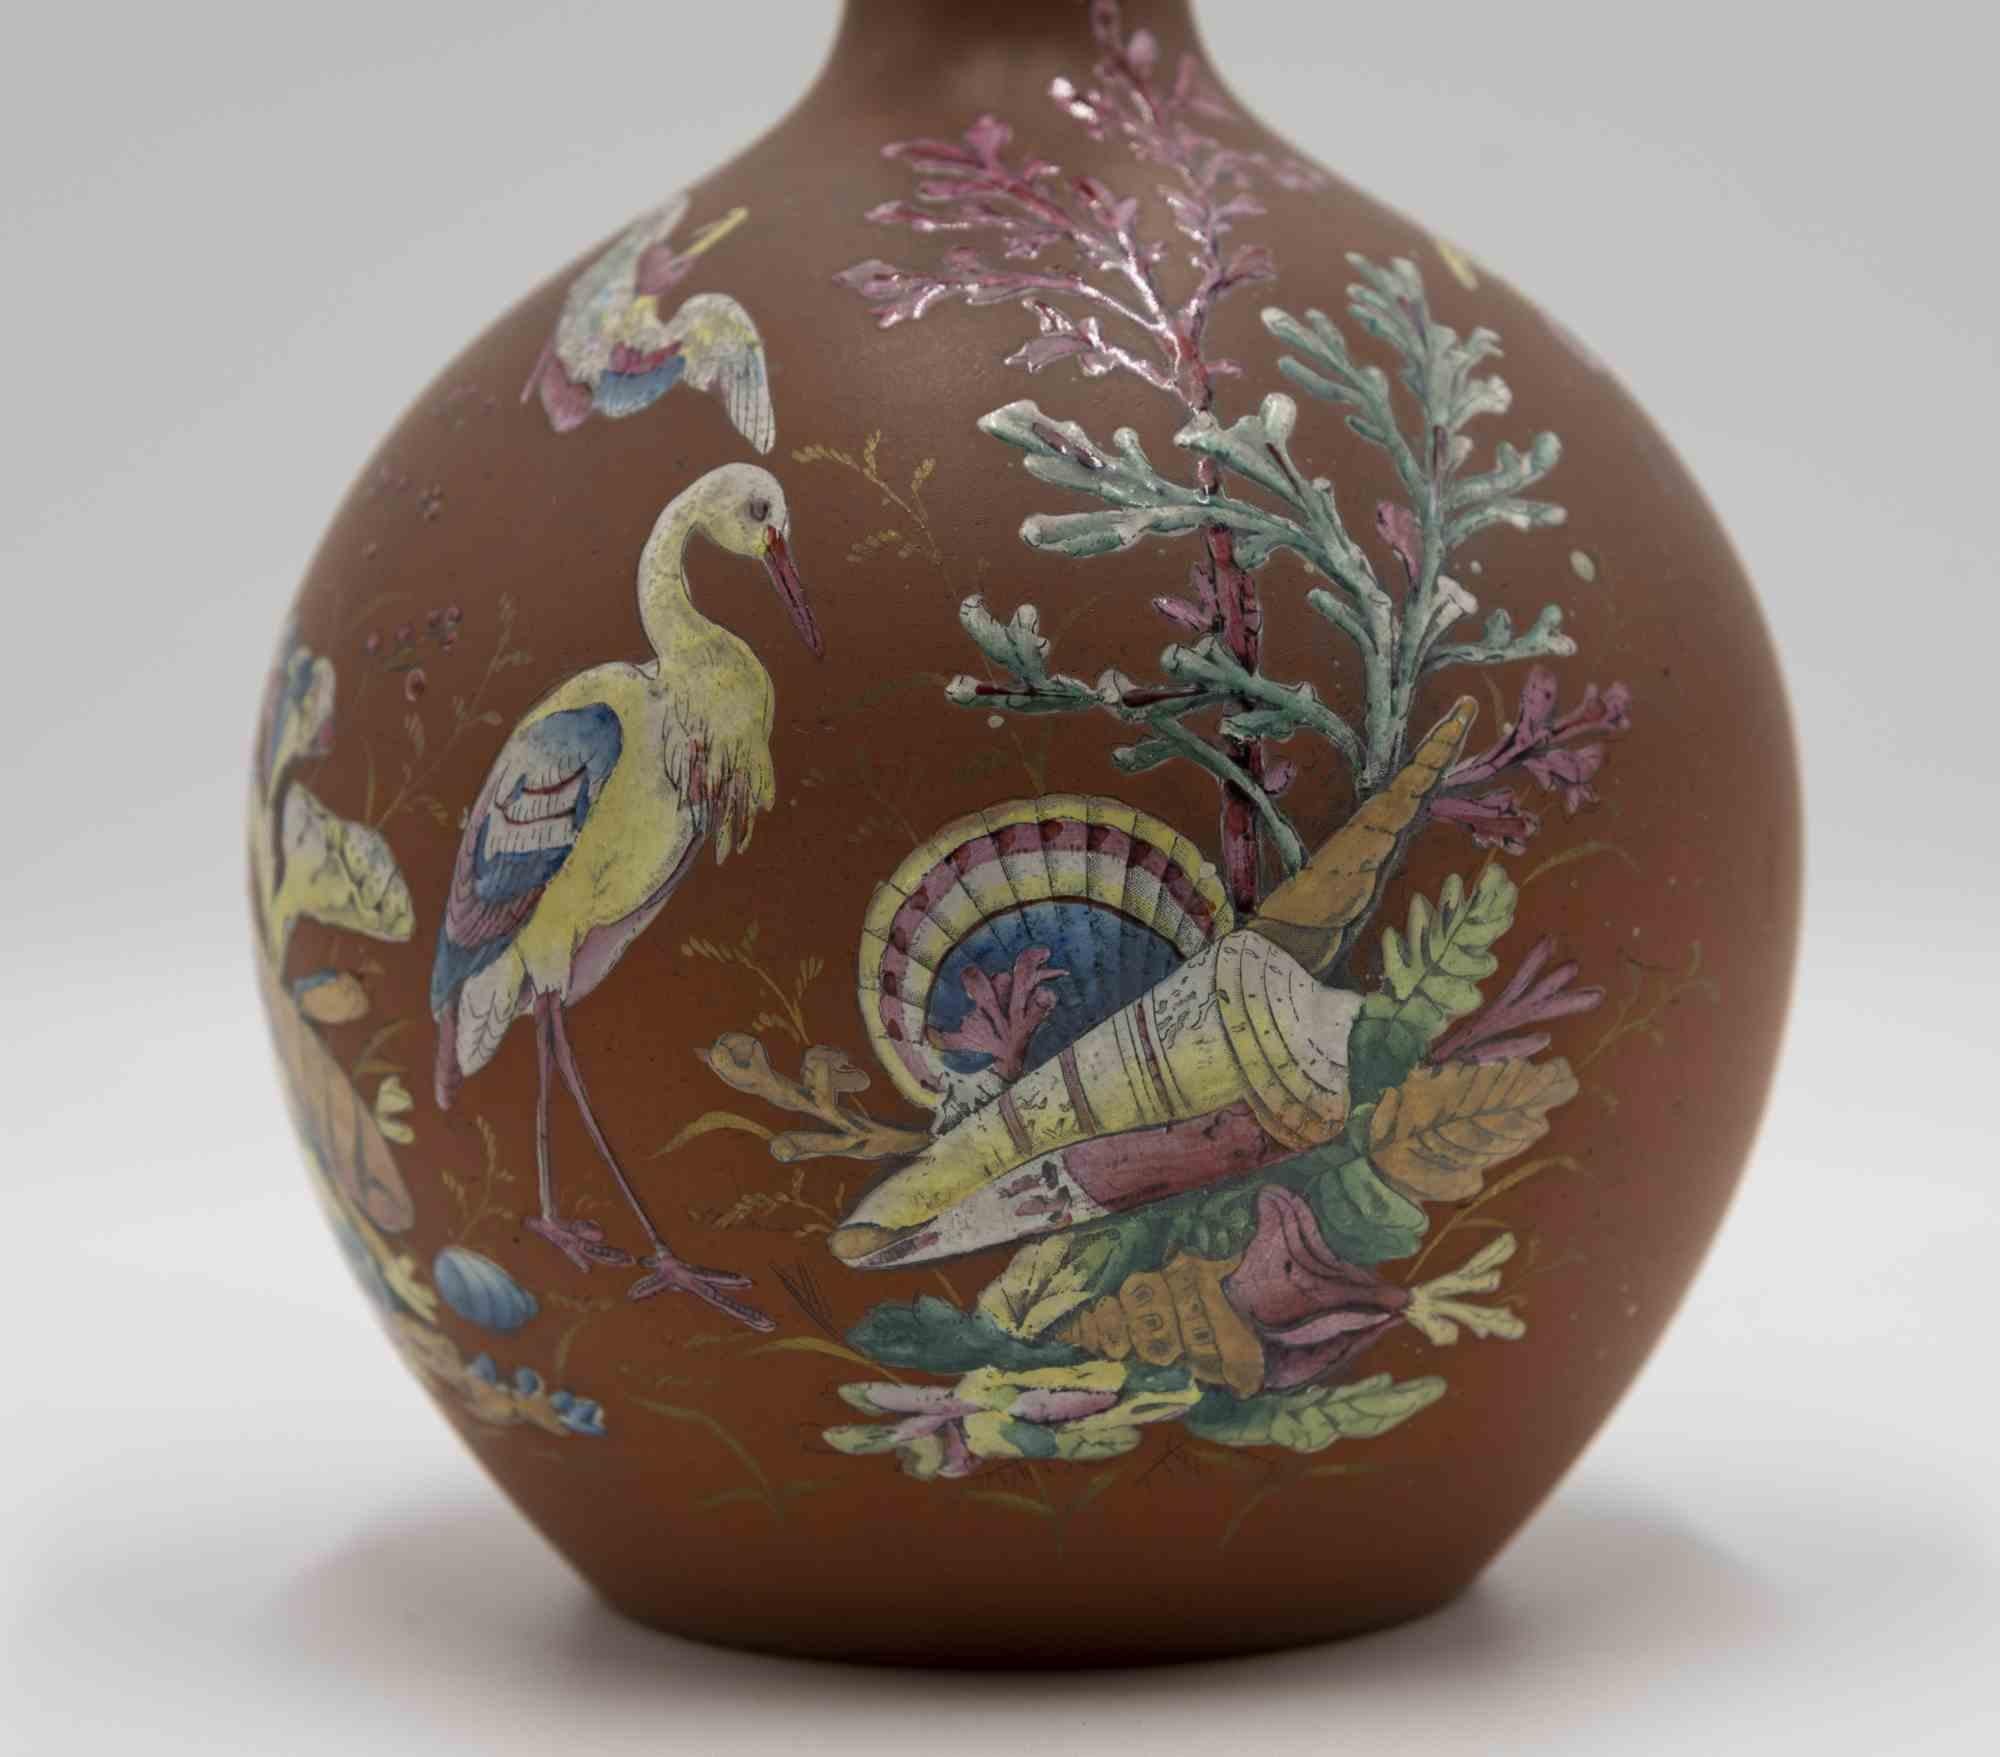 Bottle with natural decorations is a terracotta bottle realized in the early 20th century.

The bottle is decorated with images of animals and plants and it has a stopper.

Good condition.